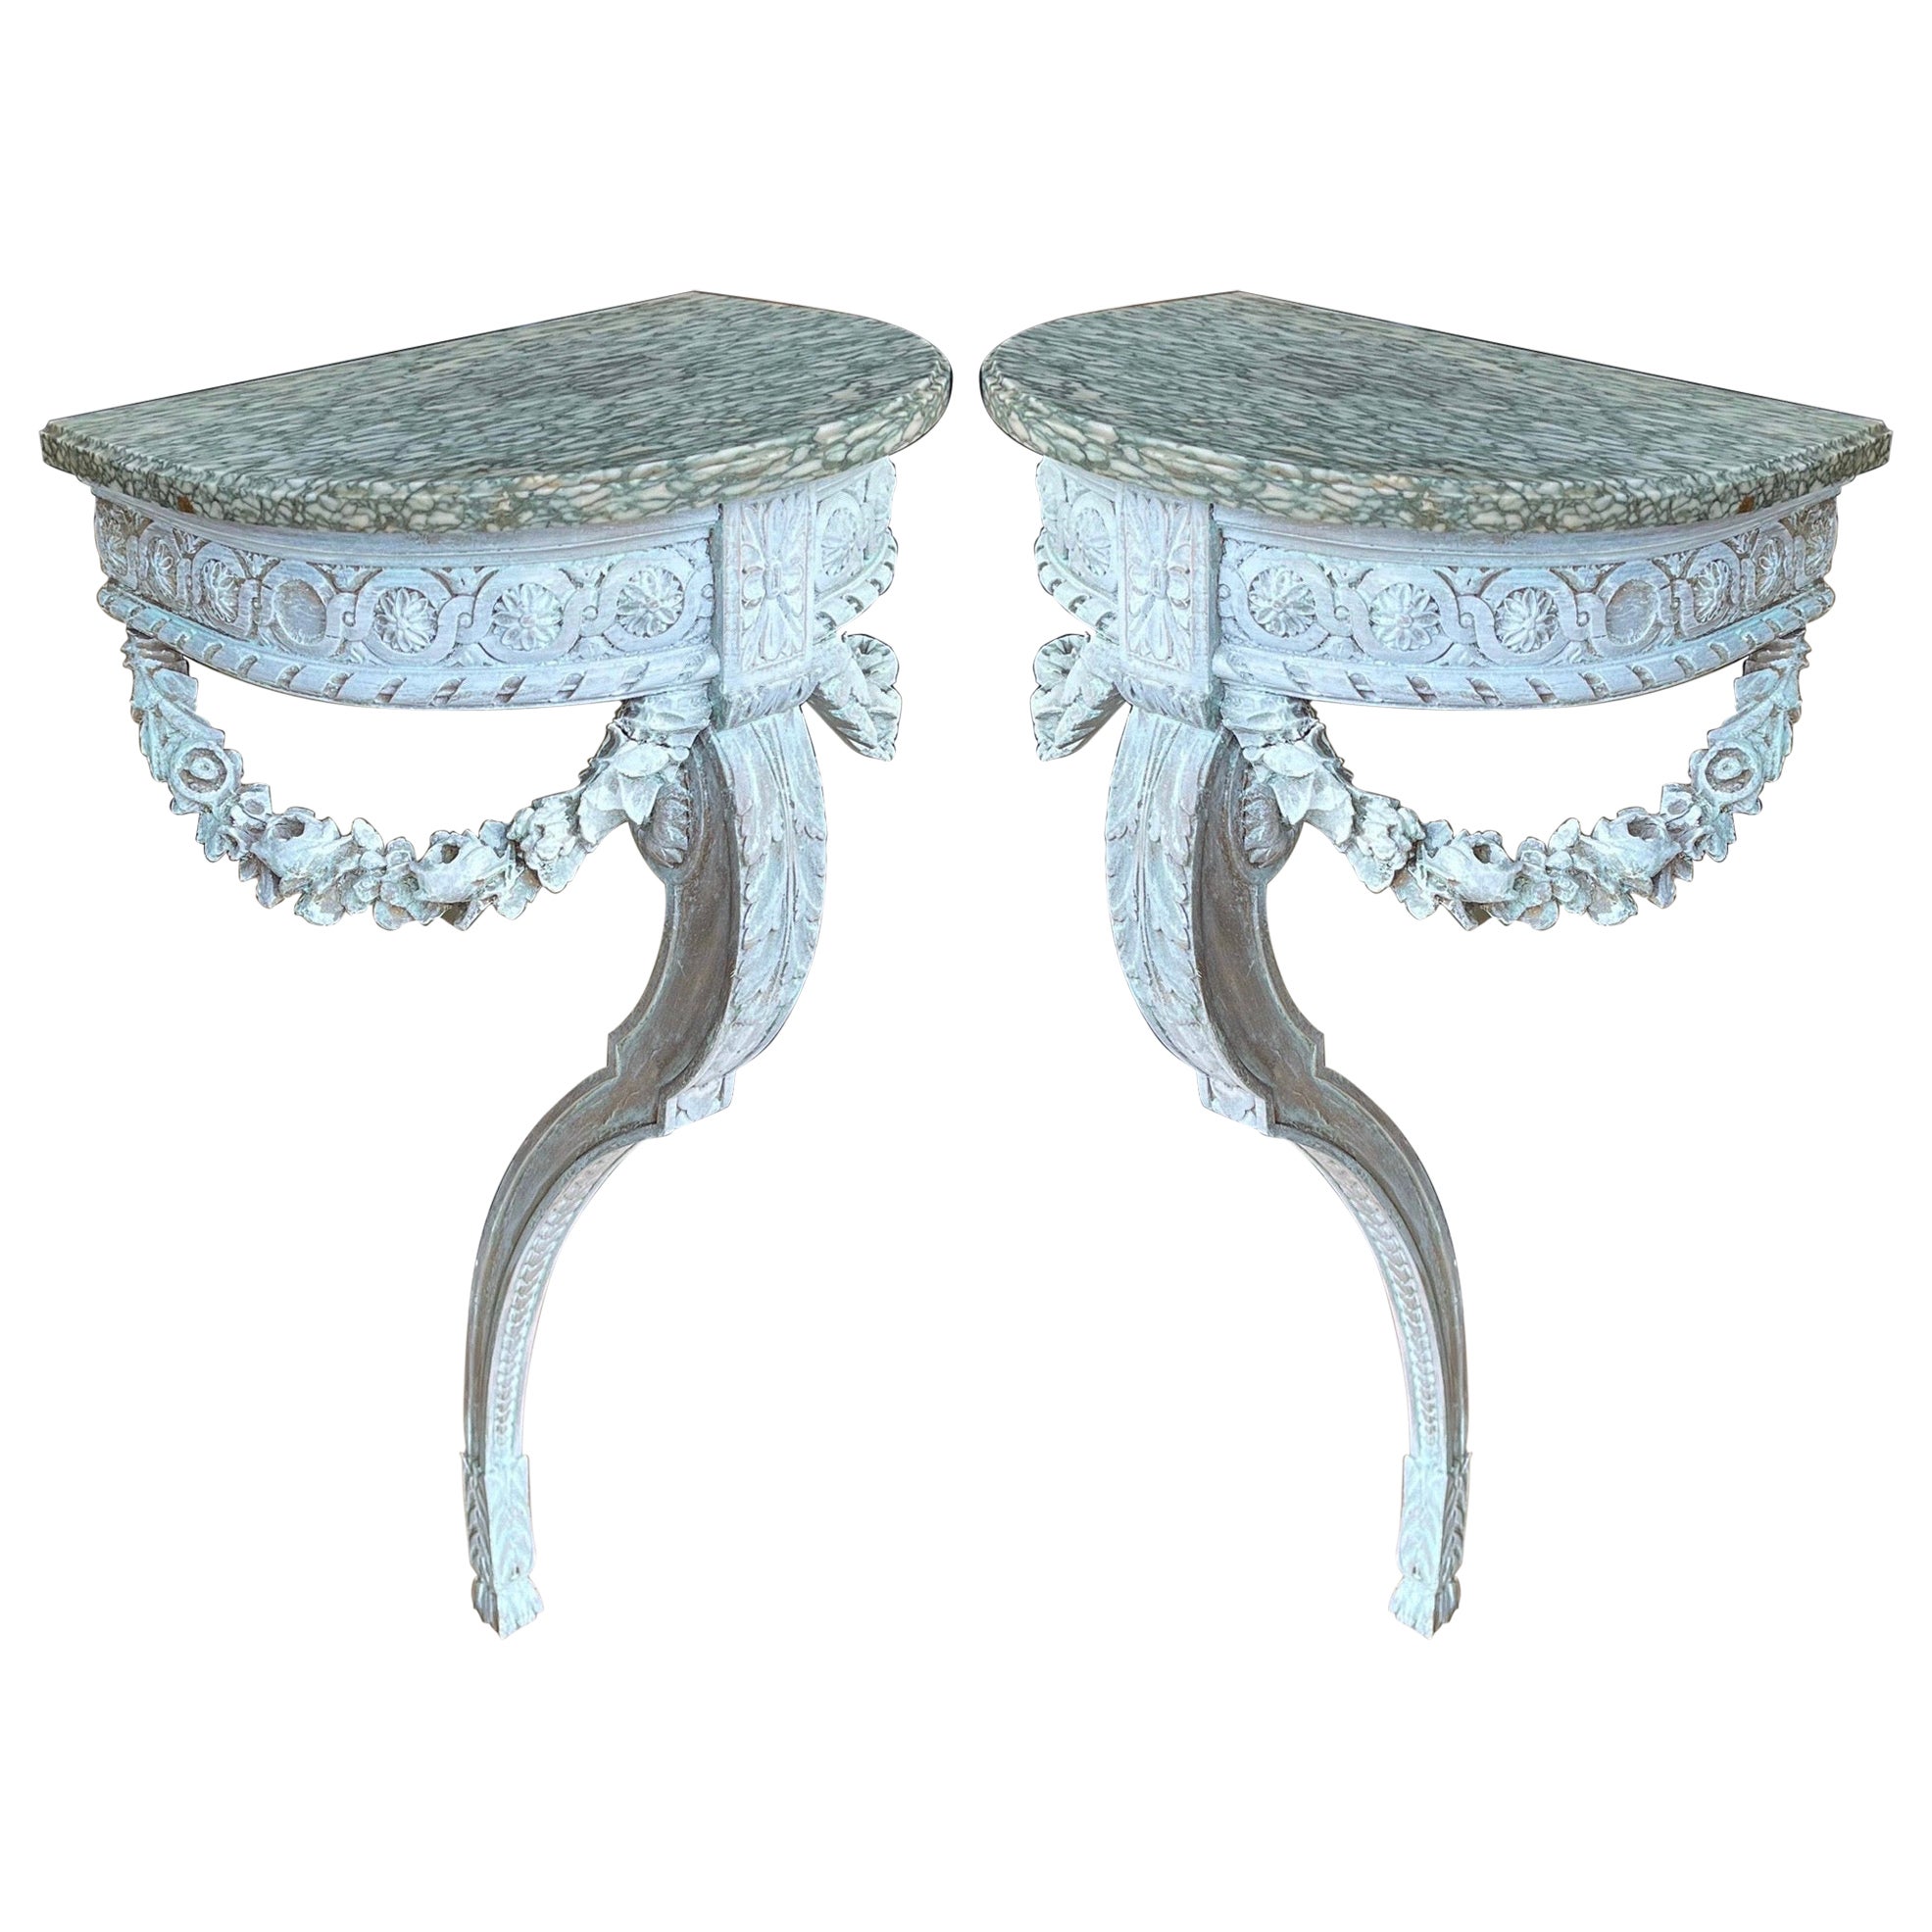 19th-C. French Lymed Marble Top Console Tables W/ Carved Barbola Swags -Pair